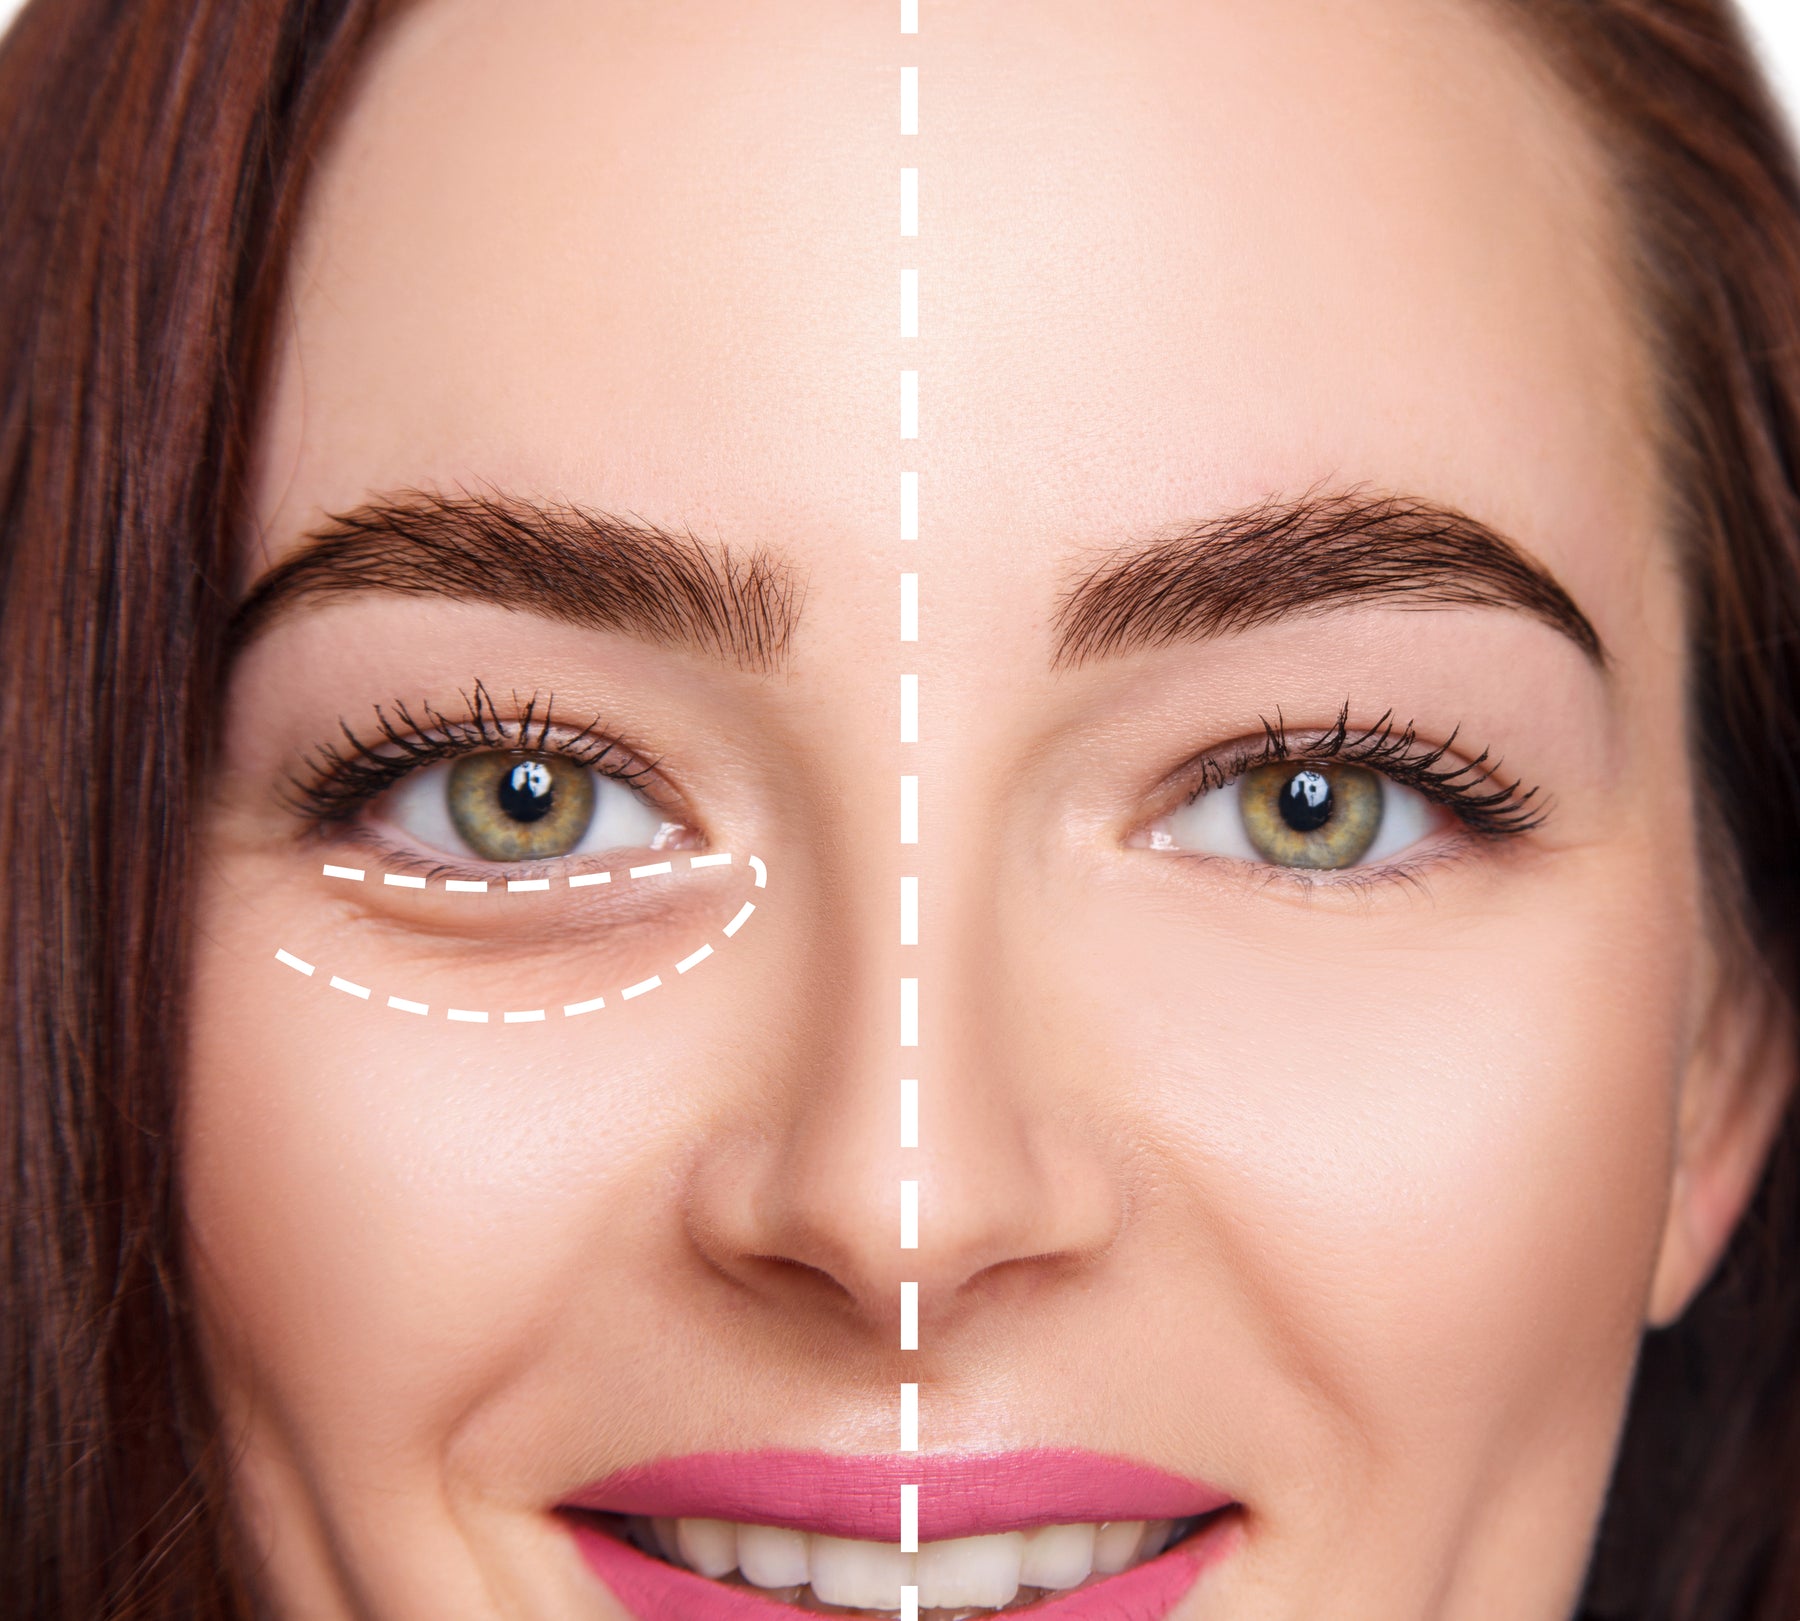 Sunekos the injectable treatment to target undereye bags, dark circles and wrinkles.  Fight the signs of aging with this amazing undereye cosmetic treatment using hyaluronic acid and amino acids.  Book Now Belfast and Newry Clinics